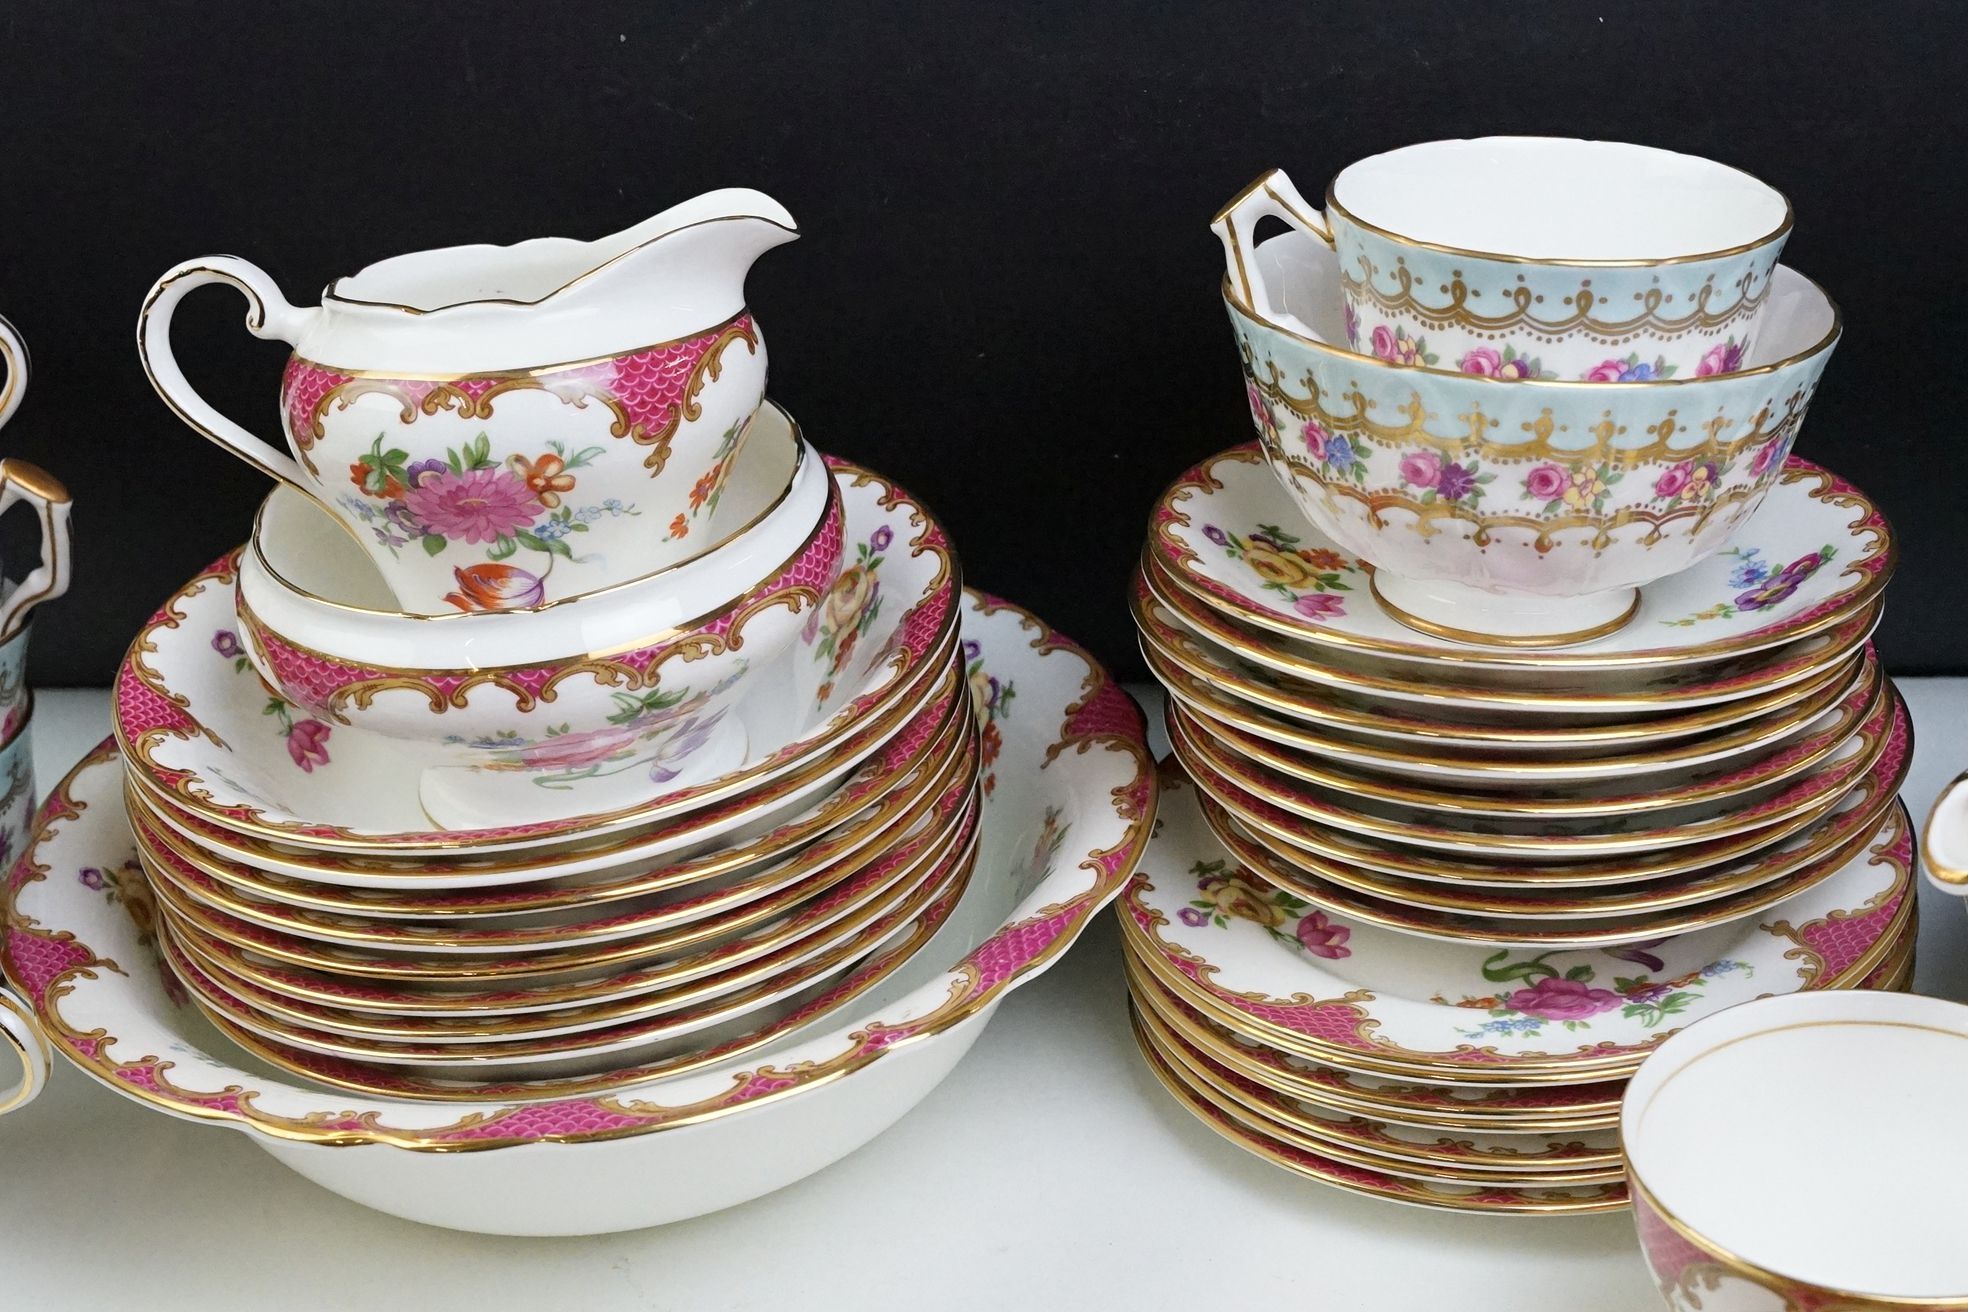 Aynsley porcelain floral tea set, pattern no. B971, to include teapot, 8 cups, 9 saucers, 7 tea - Image 6 of 9